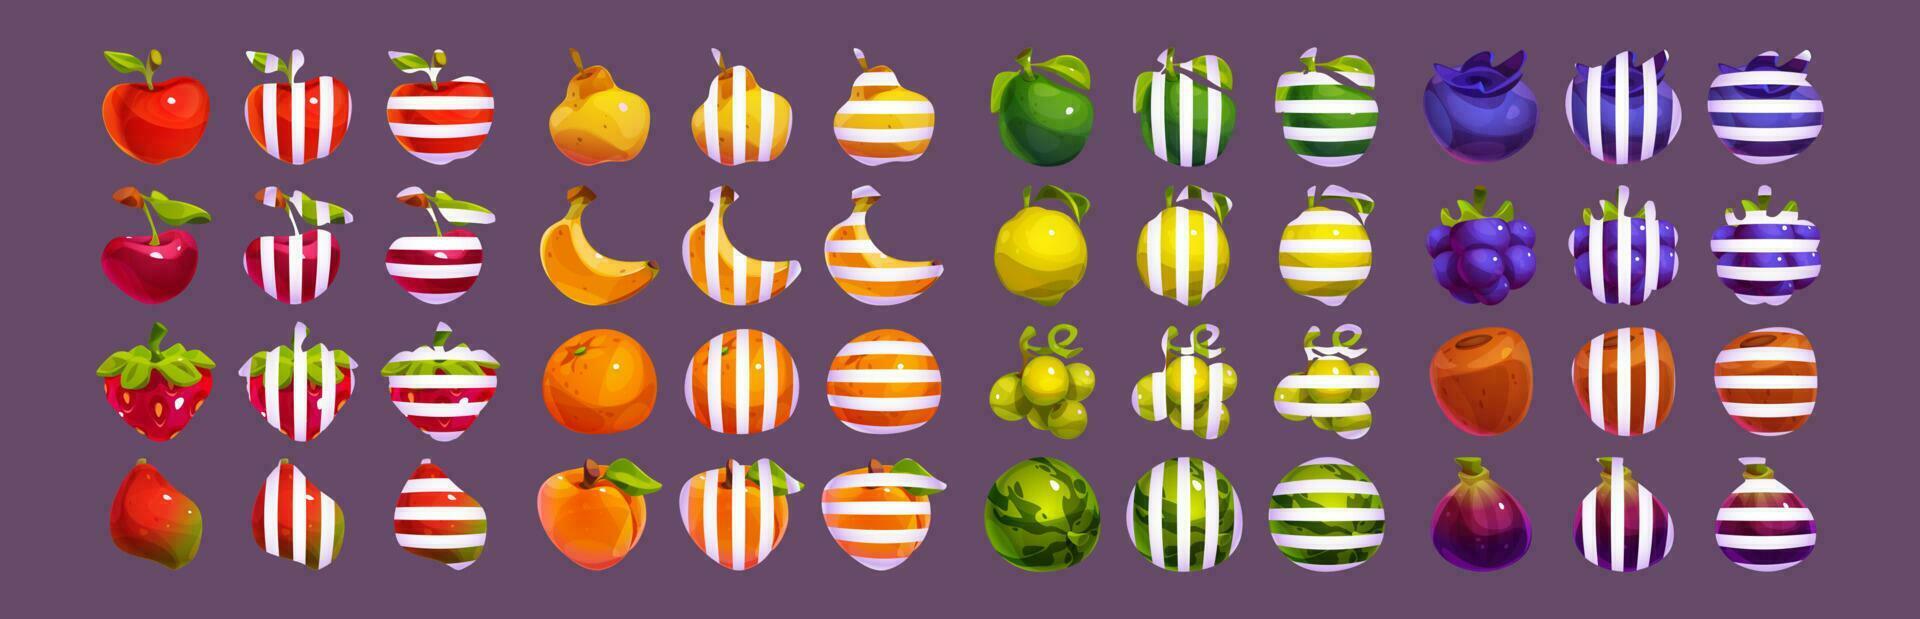 Ui mobile game fruit with stripes illustration vector